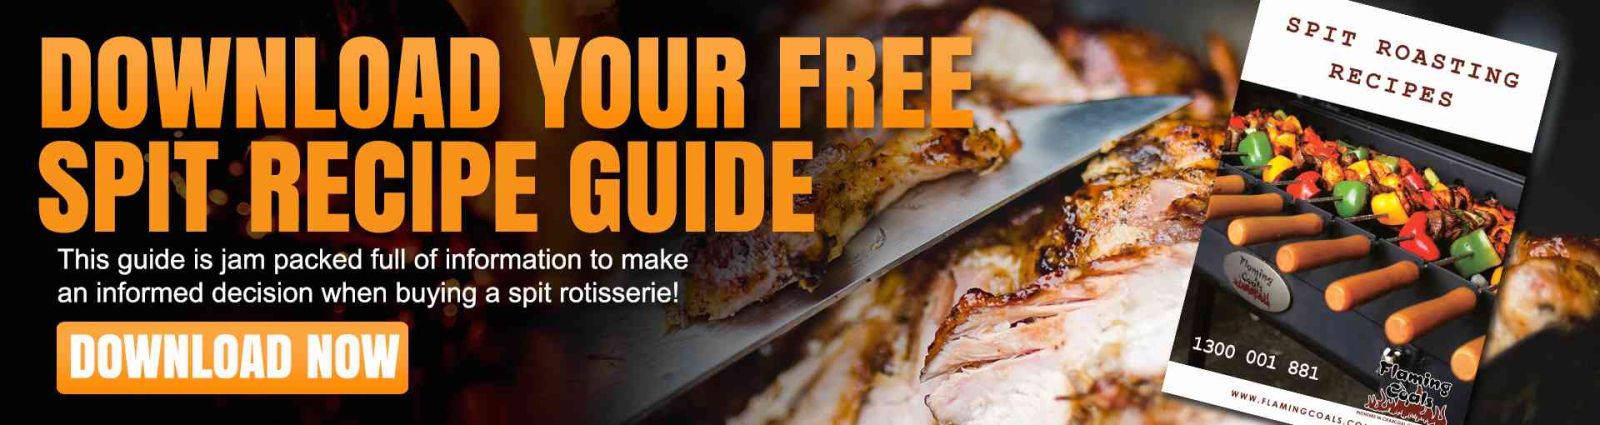 This is a banner that links to the Spit Roasting recipe book available for download